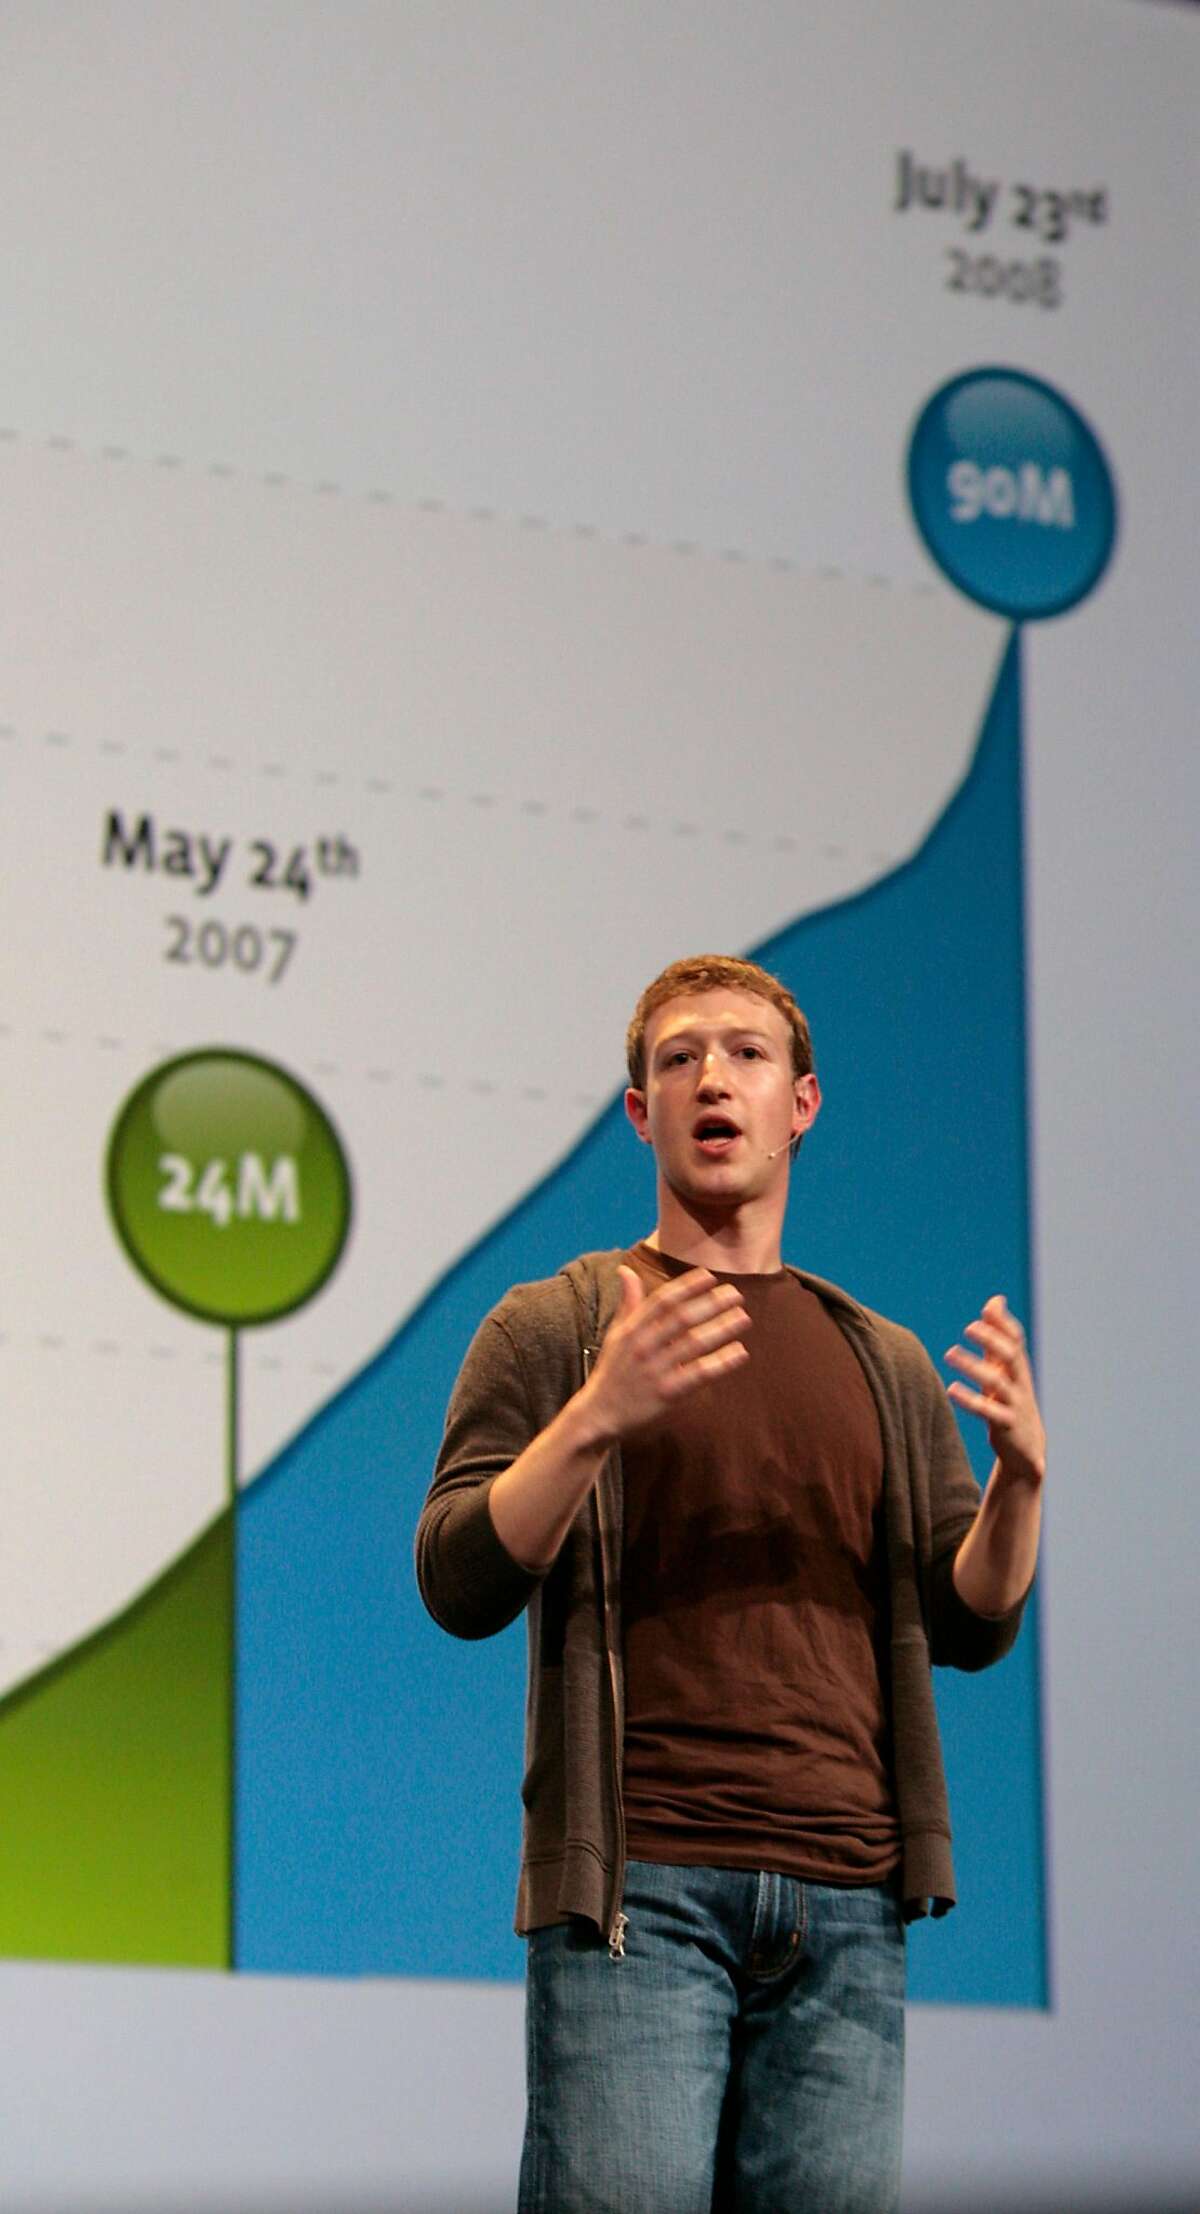 Facebook founder Mark Zuckerberg shows a graphic illustrating the growth of Facebook users as he speaks at F8, Facebook's second annual developers' conference in San Francisco, Calif., on Wednesday, July 23, 2008 Photo by Kim Komenich / San Francisco Chronicle